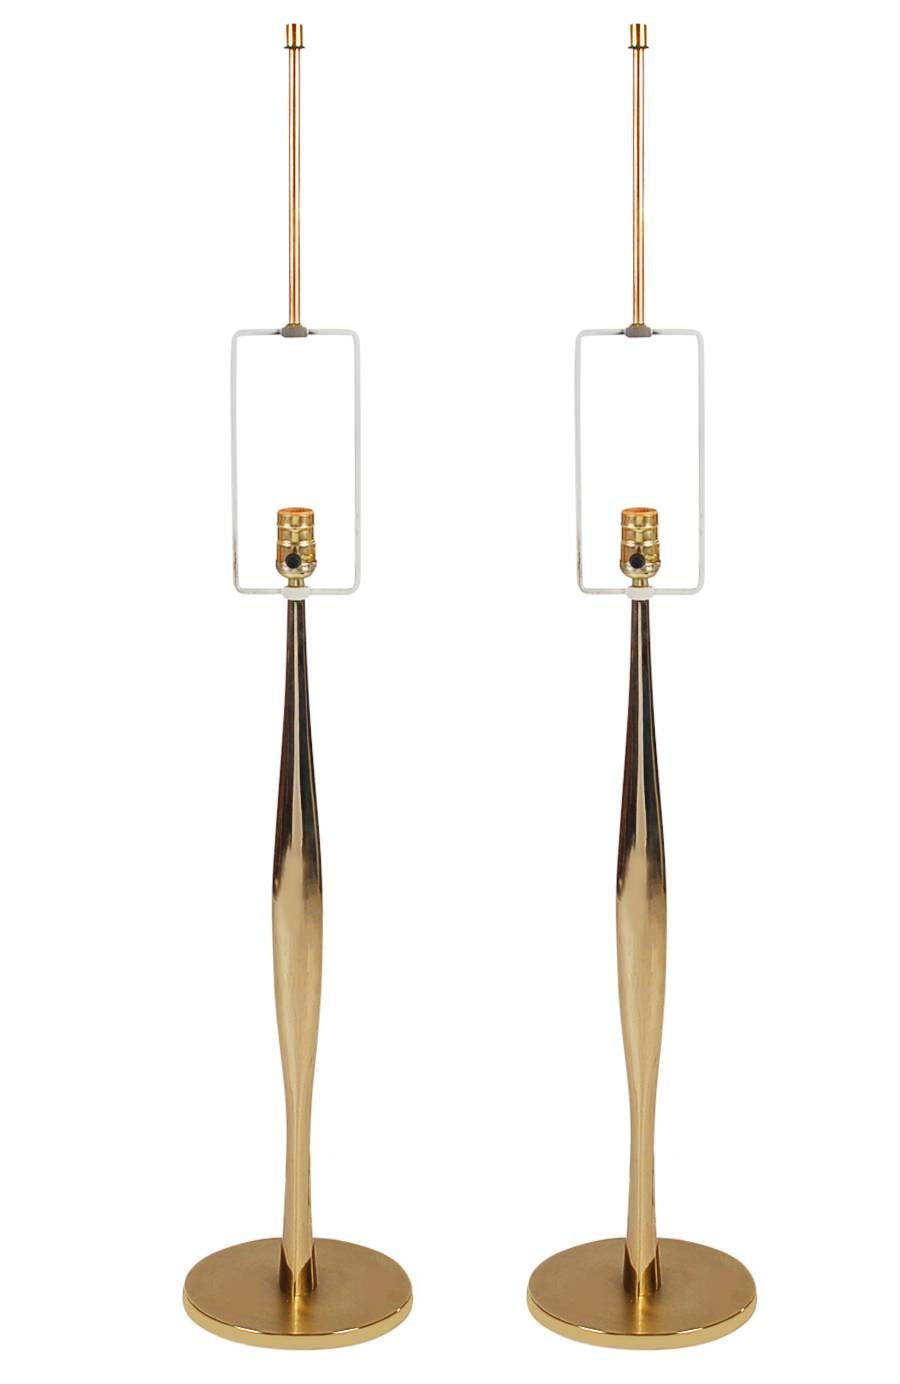 A super sexy pair of tall slender table lamps designed by Laurel Lamp Co. These measure 42.5 inches to the finial, base diameter is 8 inches. Both lamps are tested, working, and ready for use. 

In the style of: Maurizio Tempestini, Stiffel,